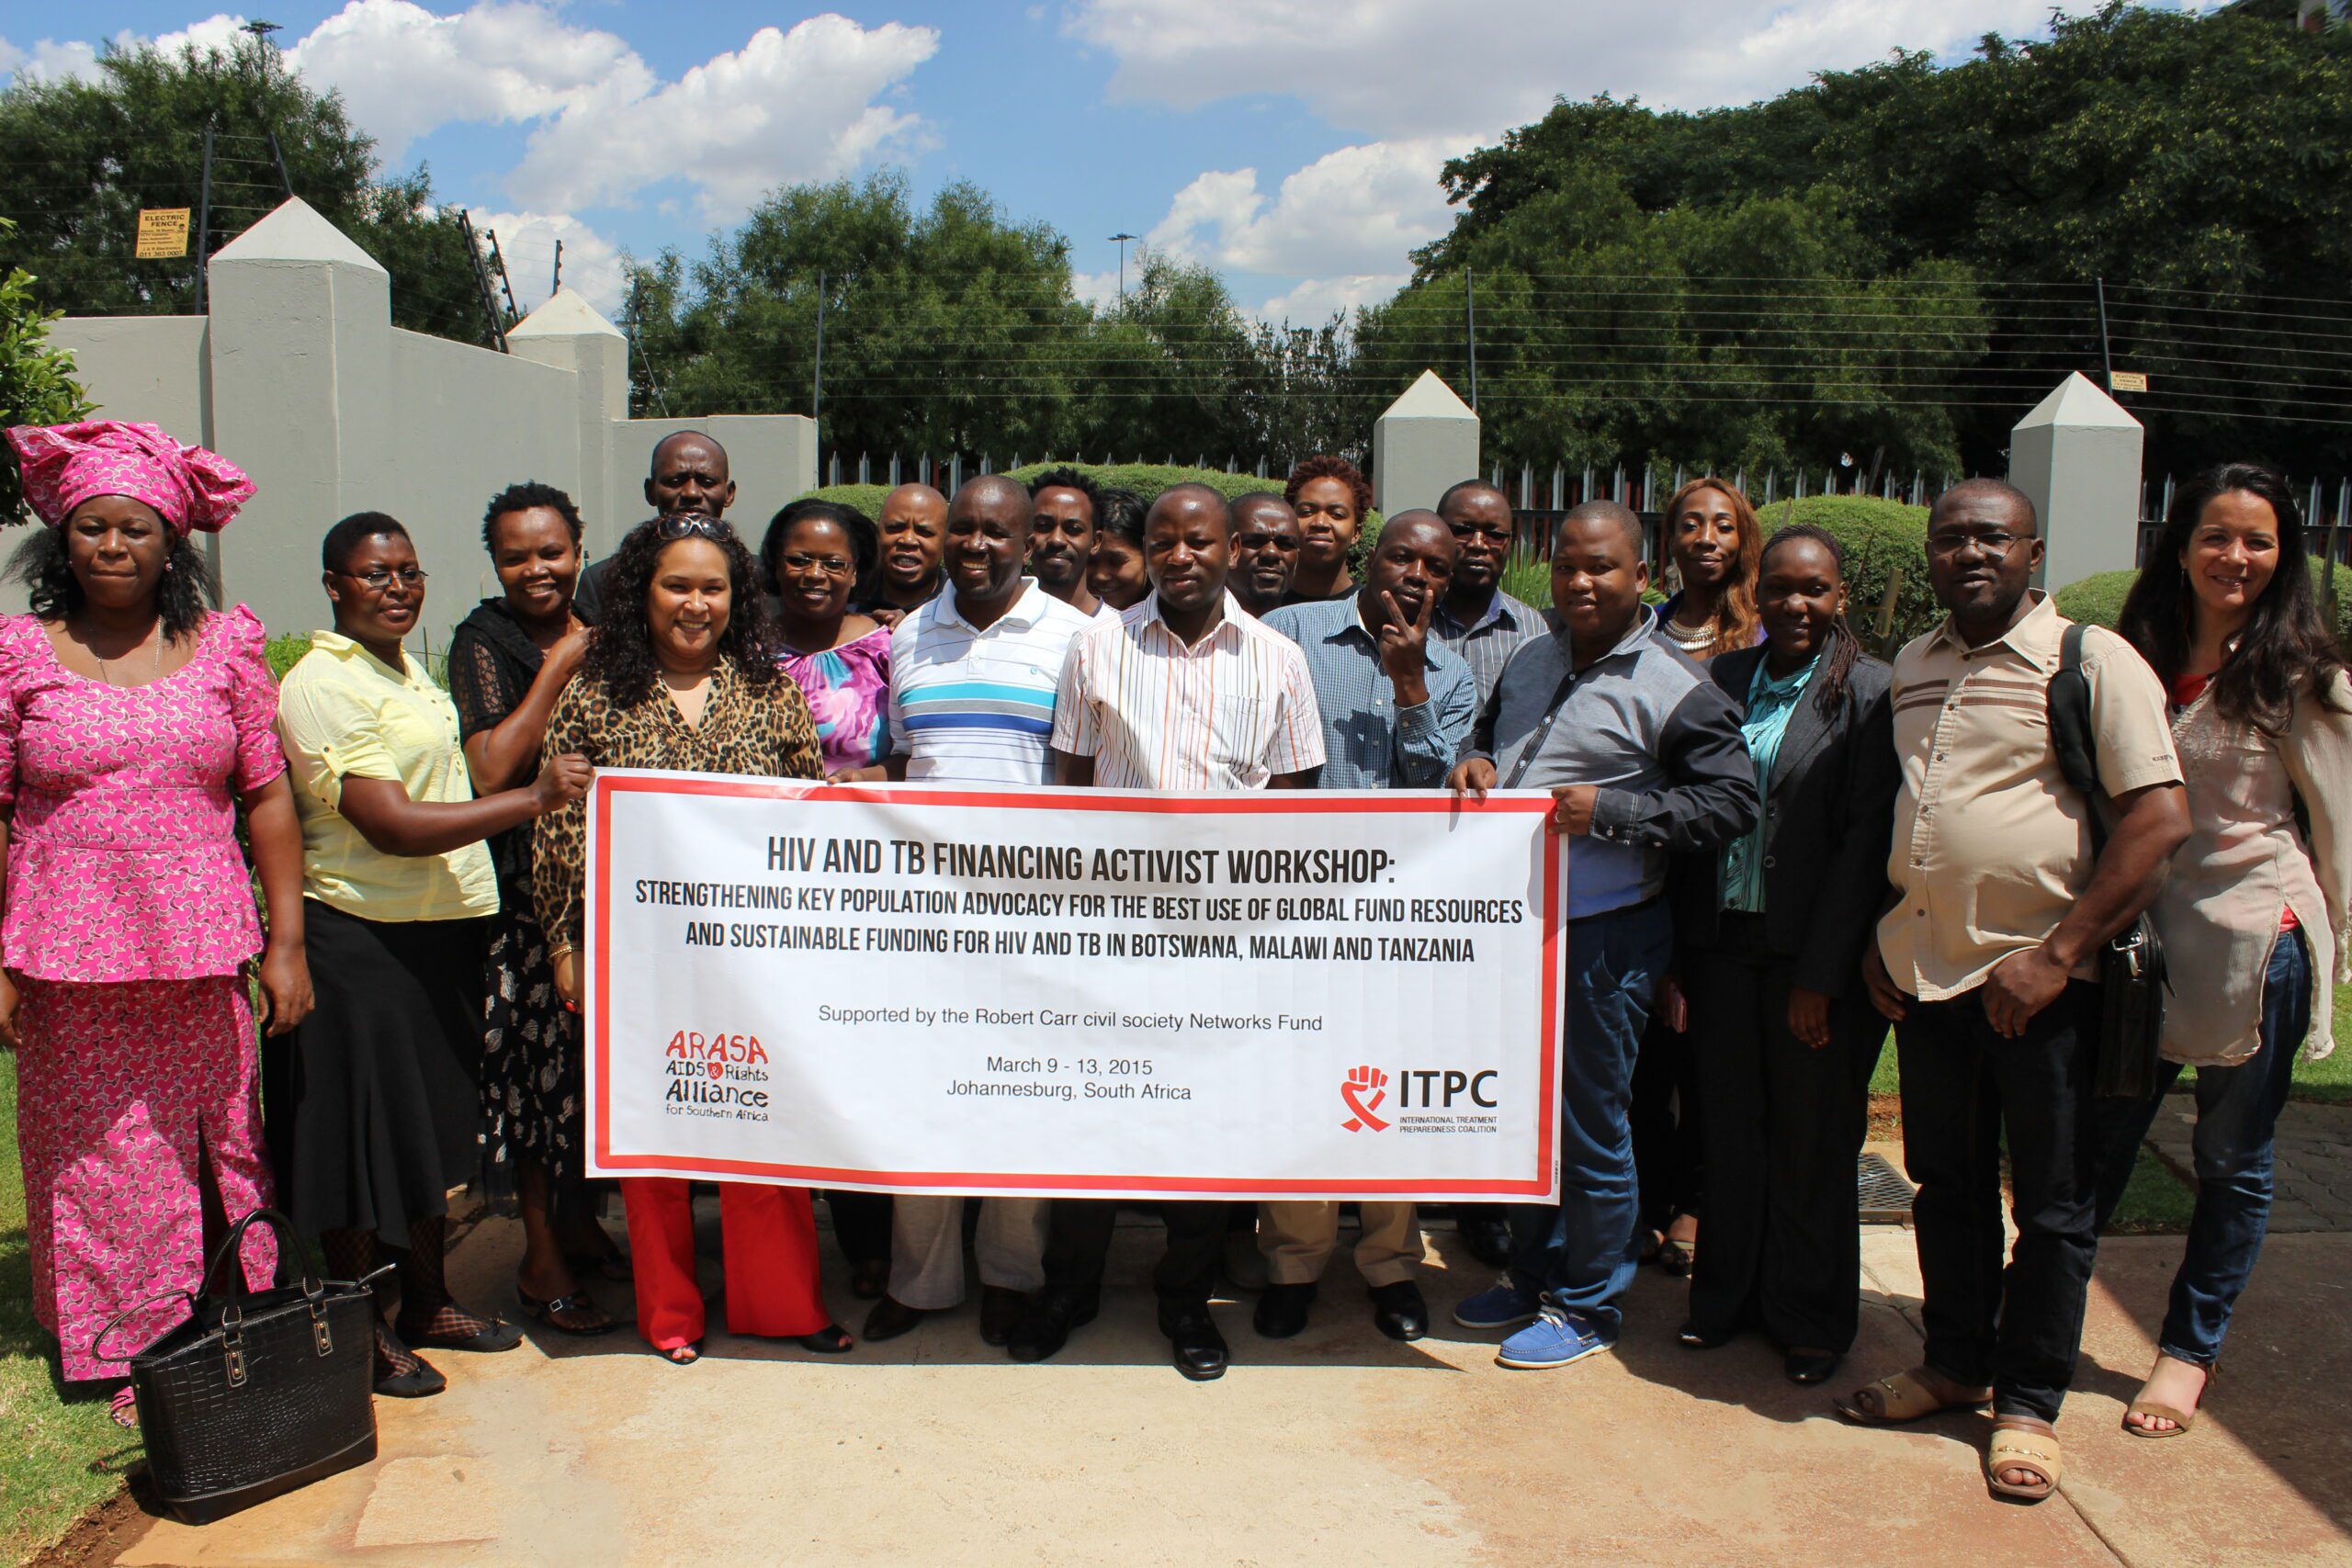 ITPC and ARASA Host Advocacy Workshop on Global Fund Resources and Sustainable Funding for HIV & TB in Botswana, Malawi and Tanzania